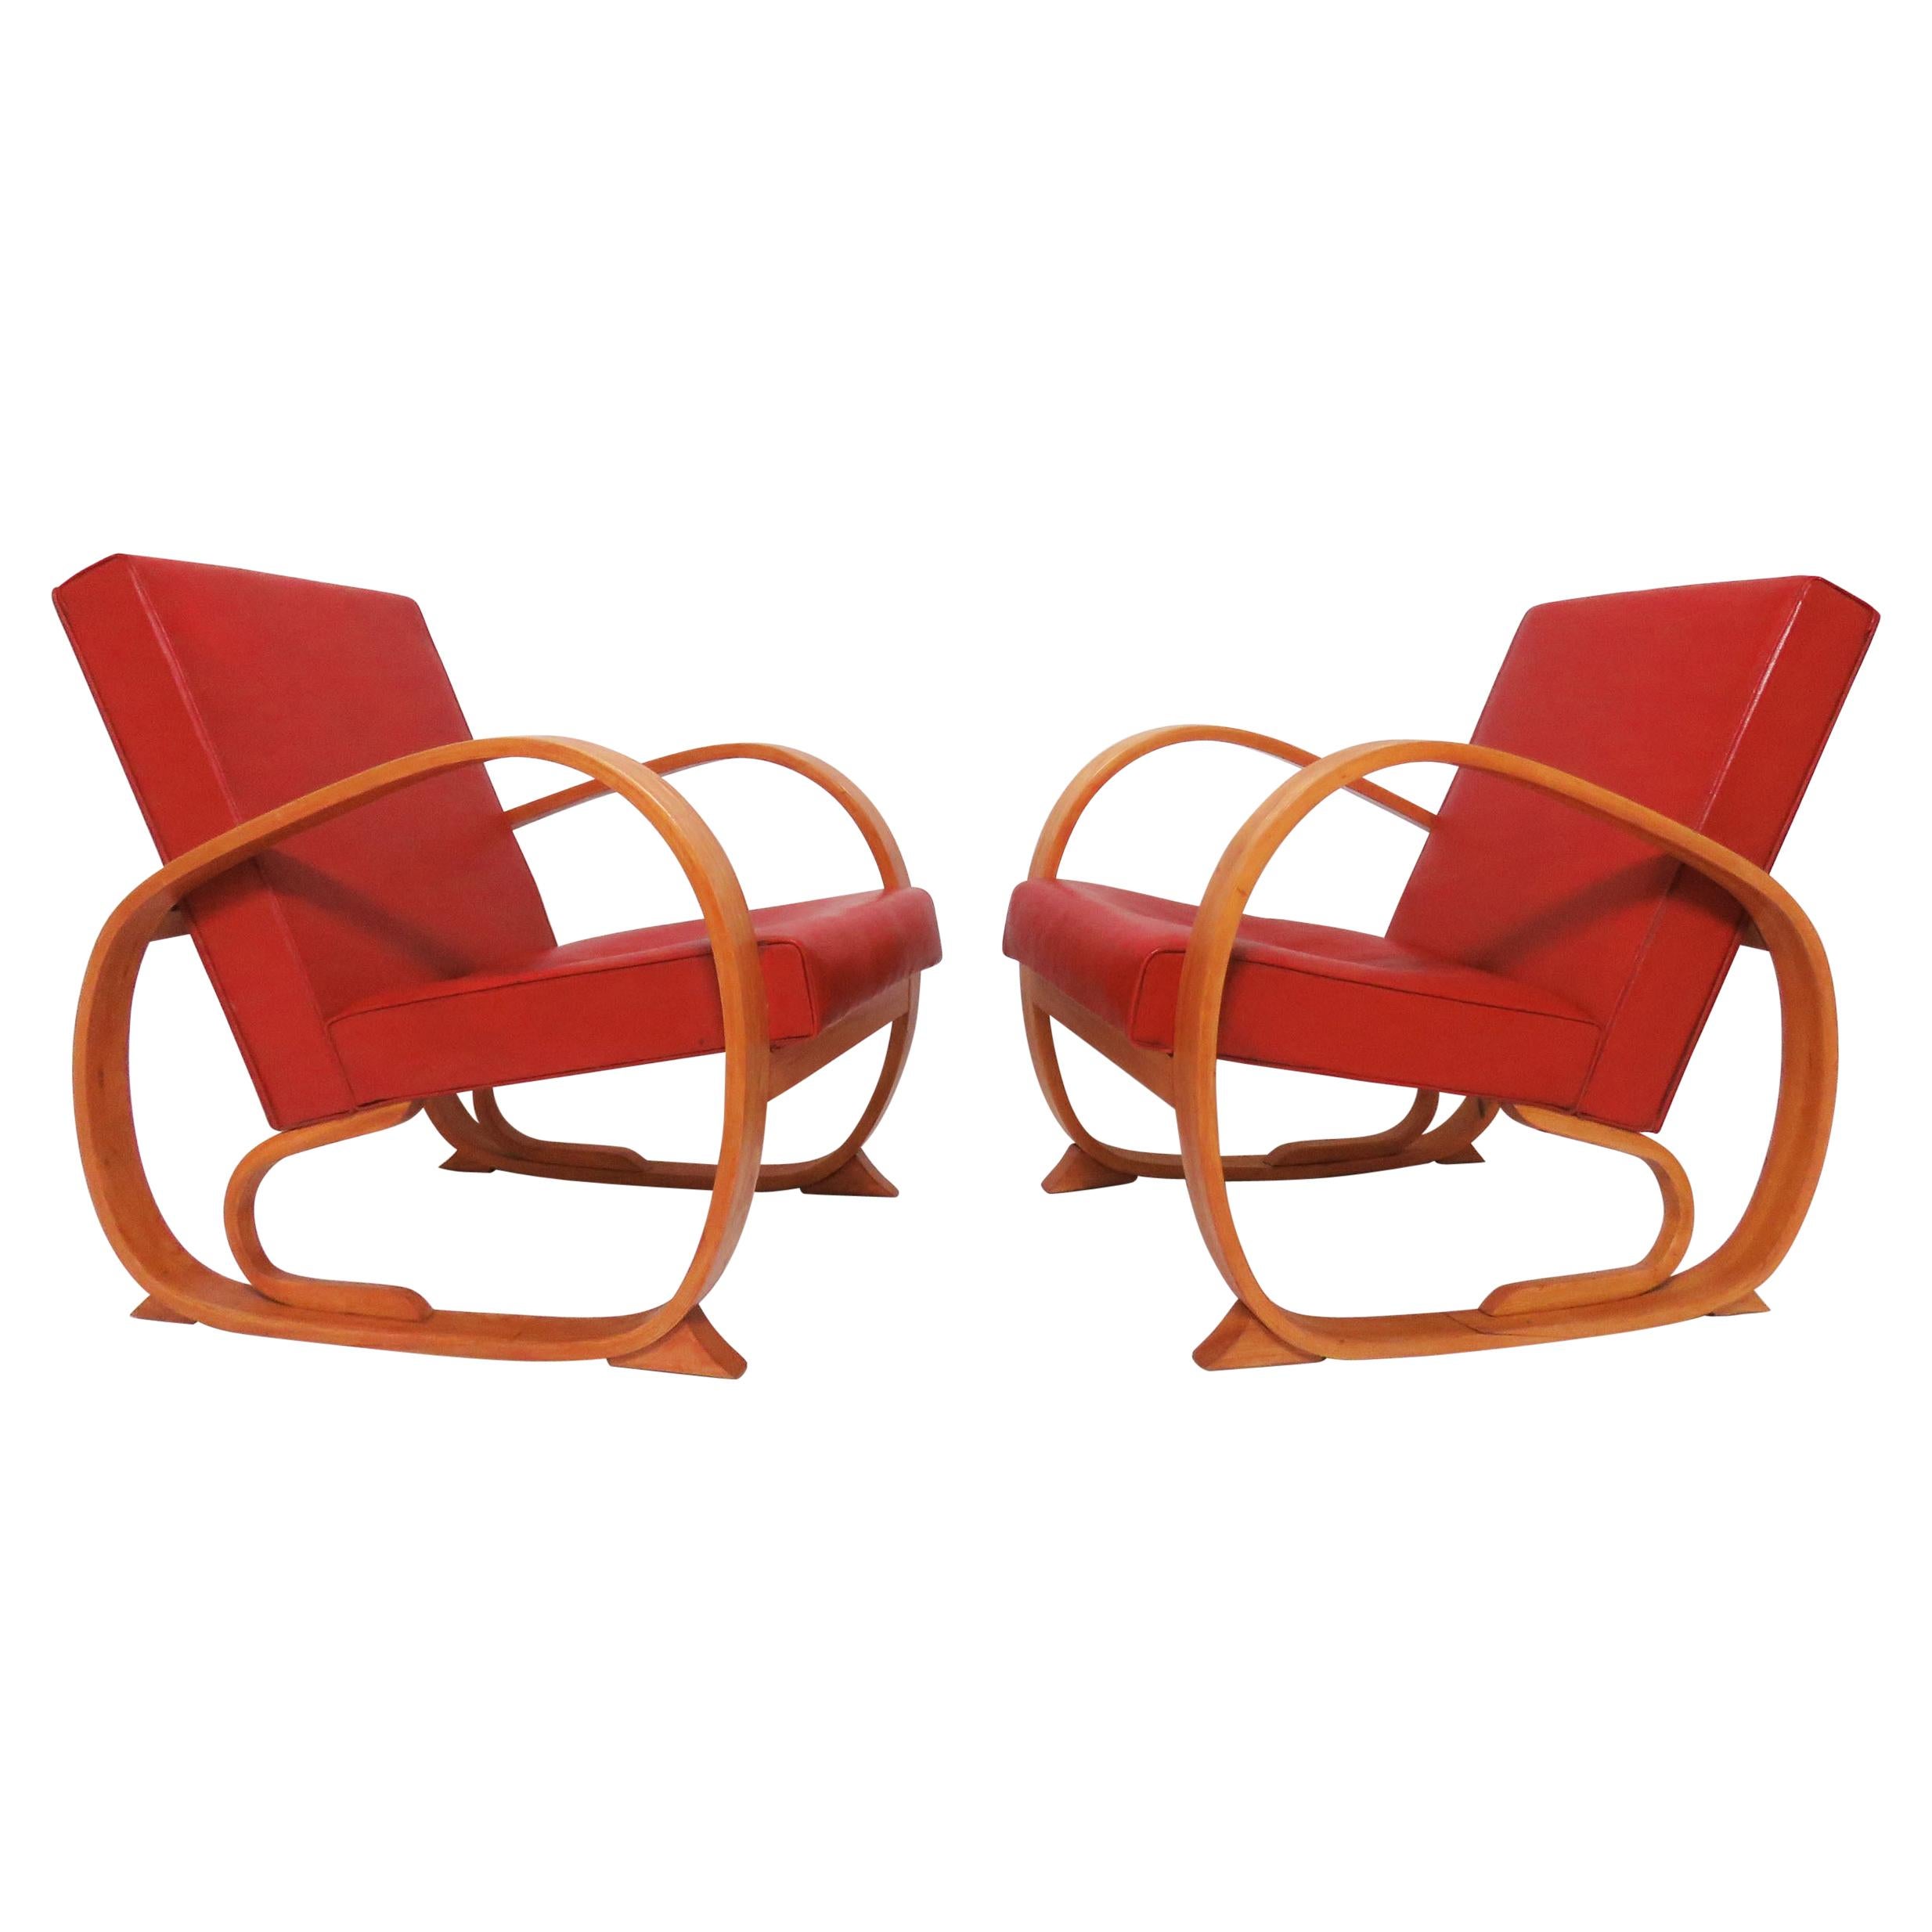 Pair of Art Deco Bentwood Club Chairs, circa 1930s